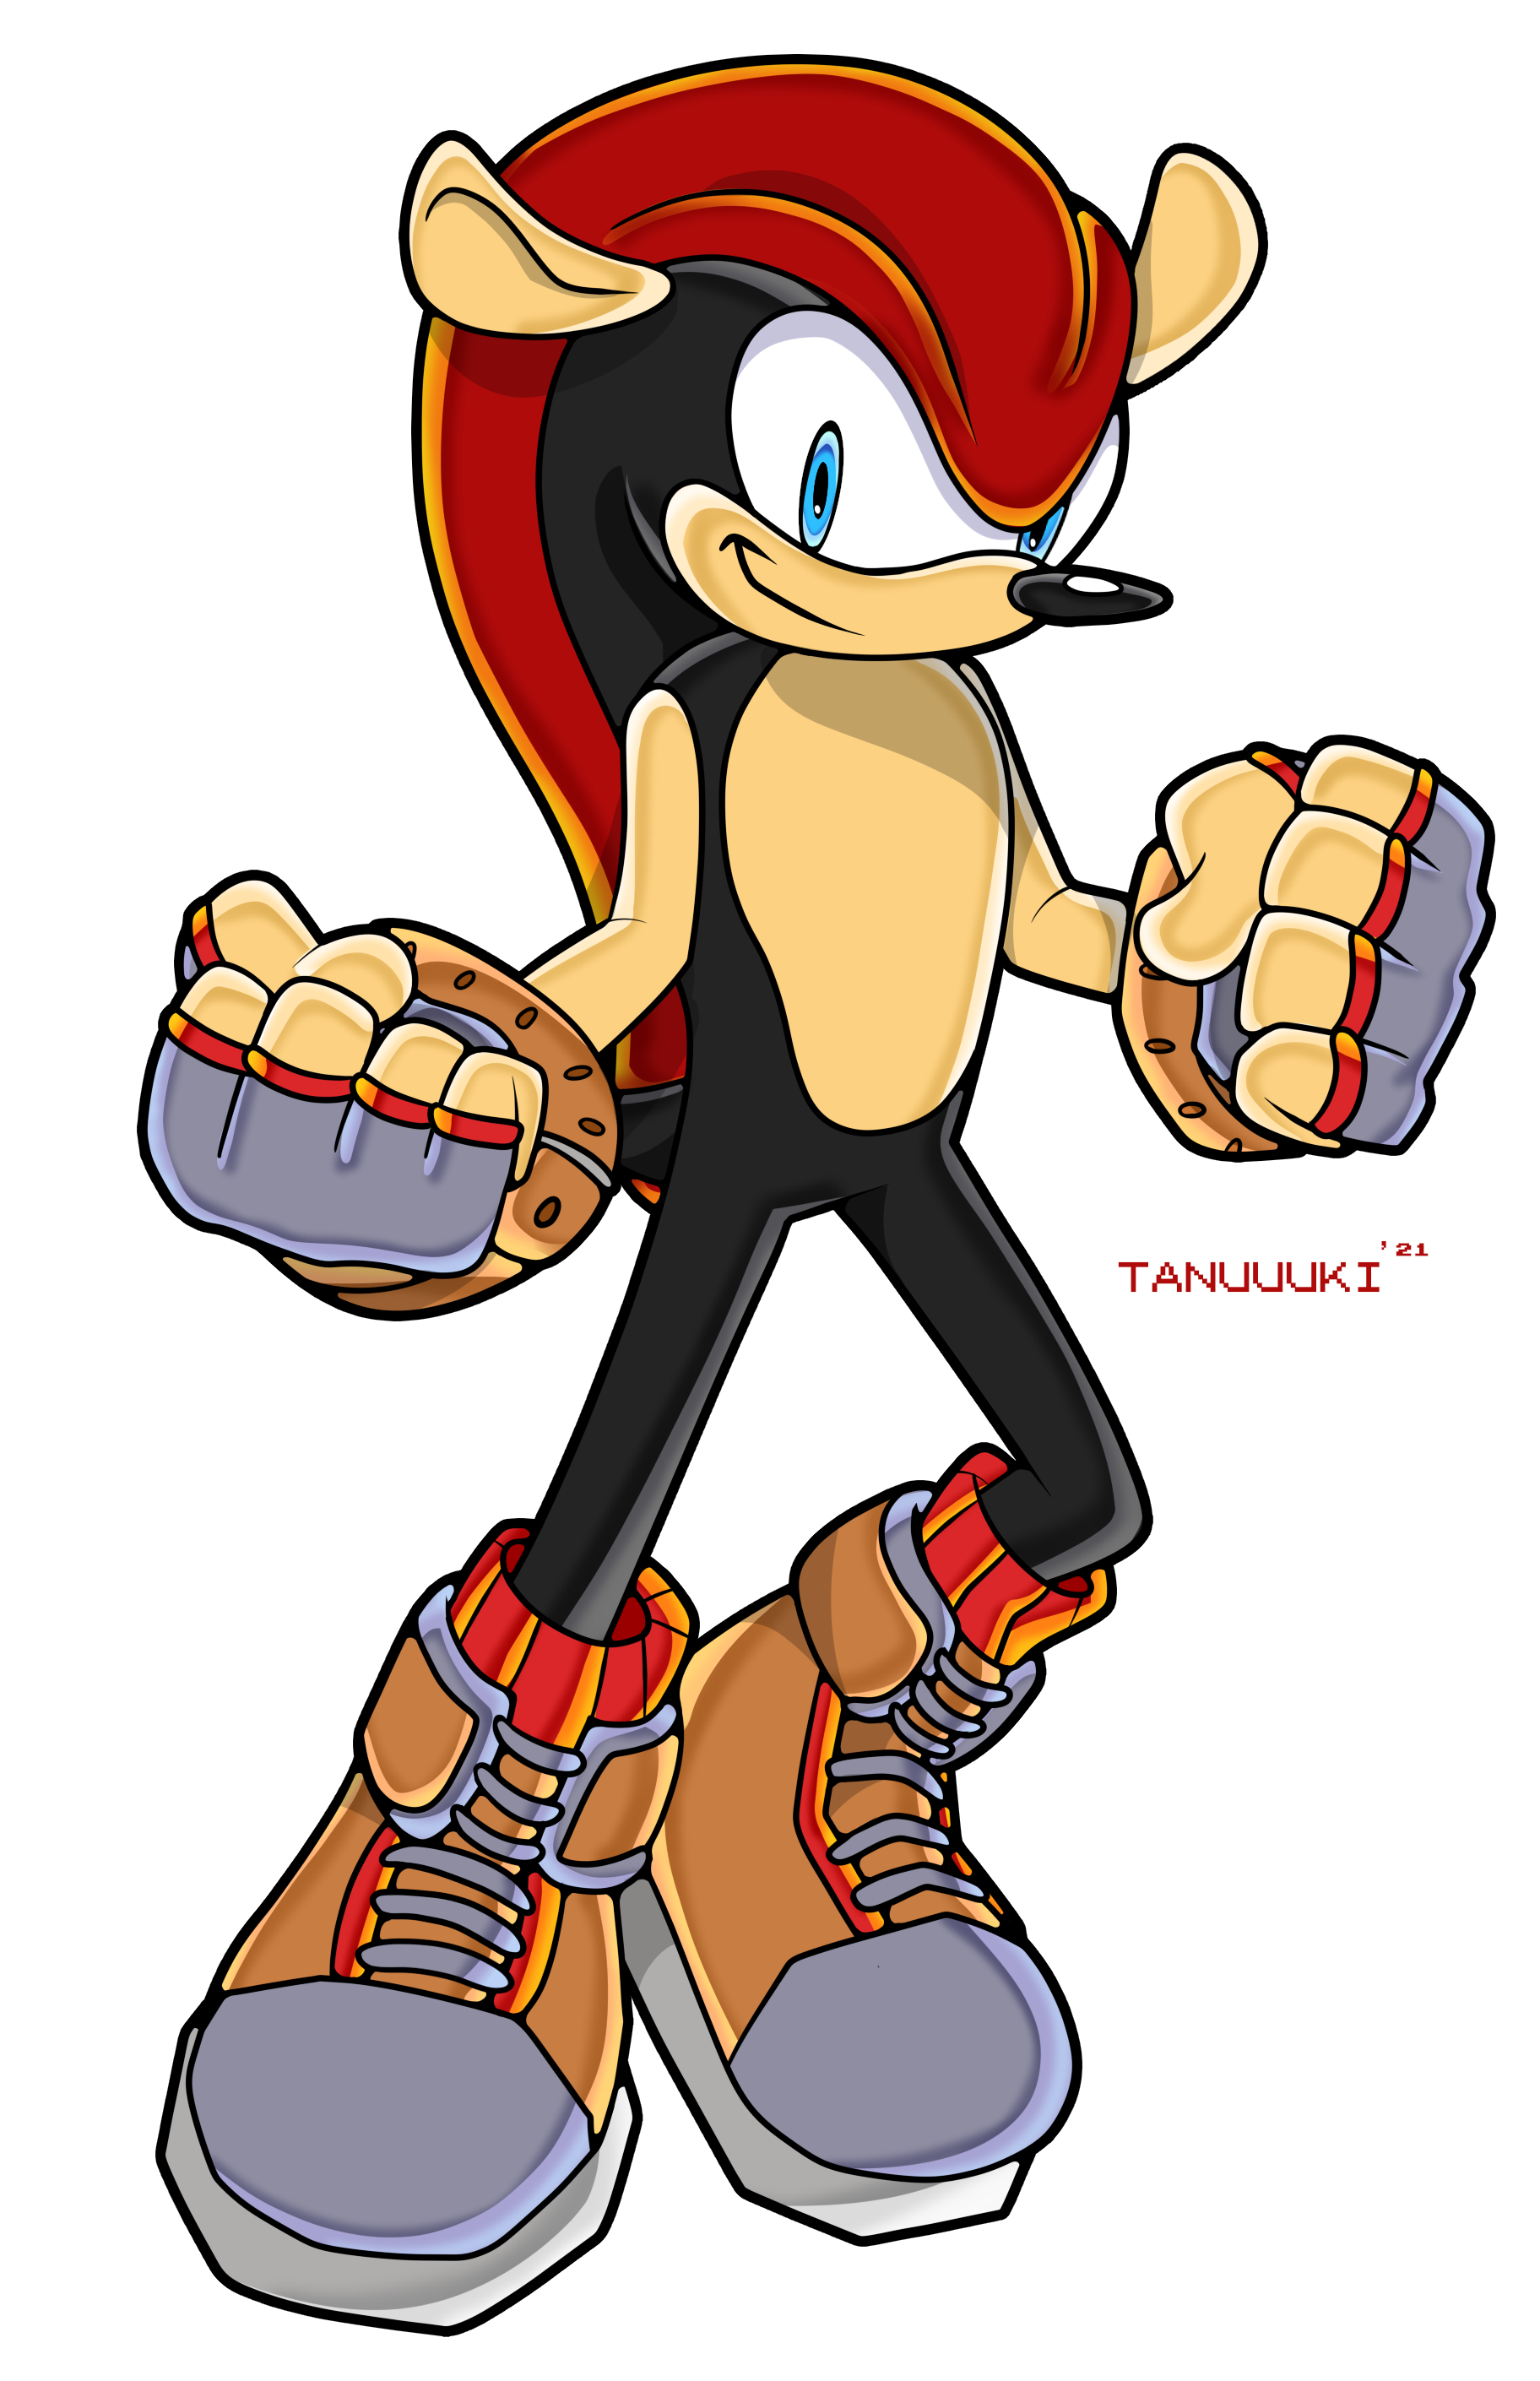 Sonic Vibes — Name: Mighty the Armadillo Age: 14 Description